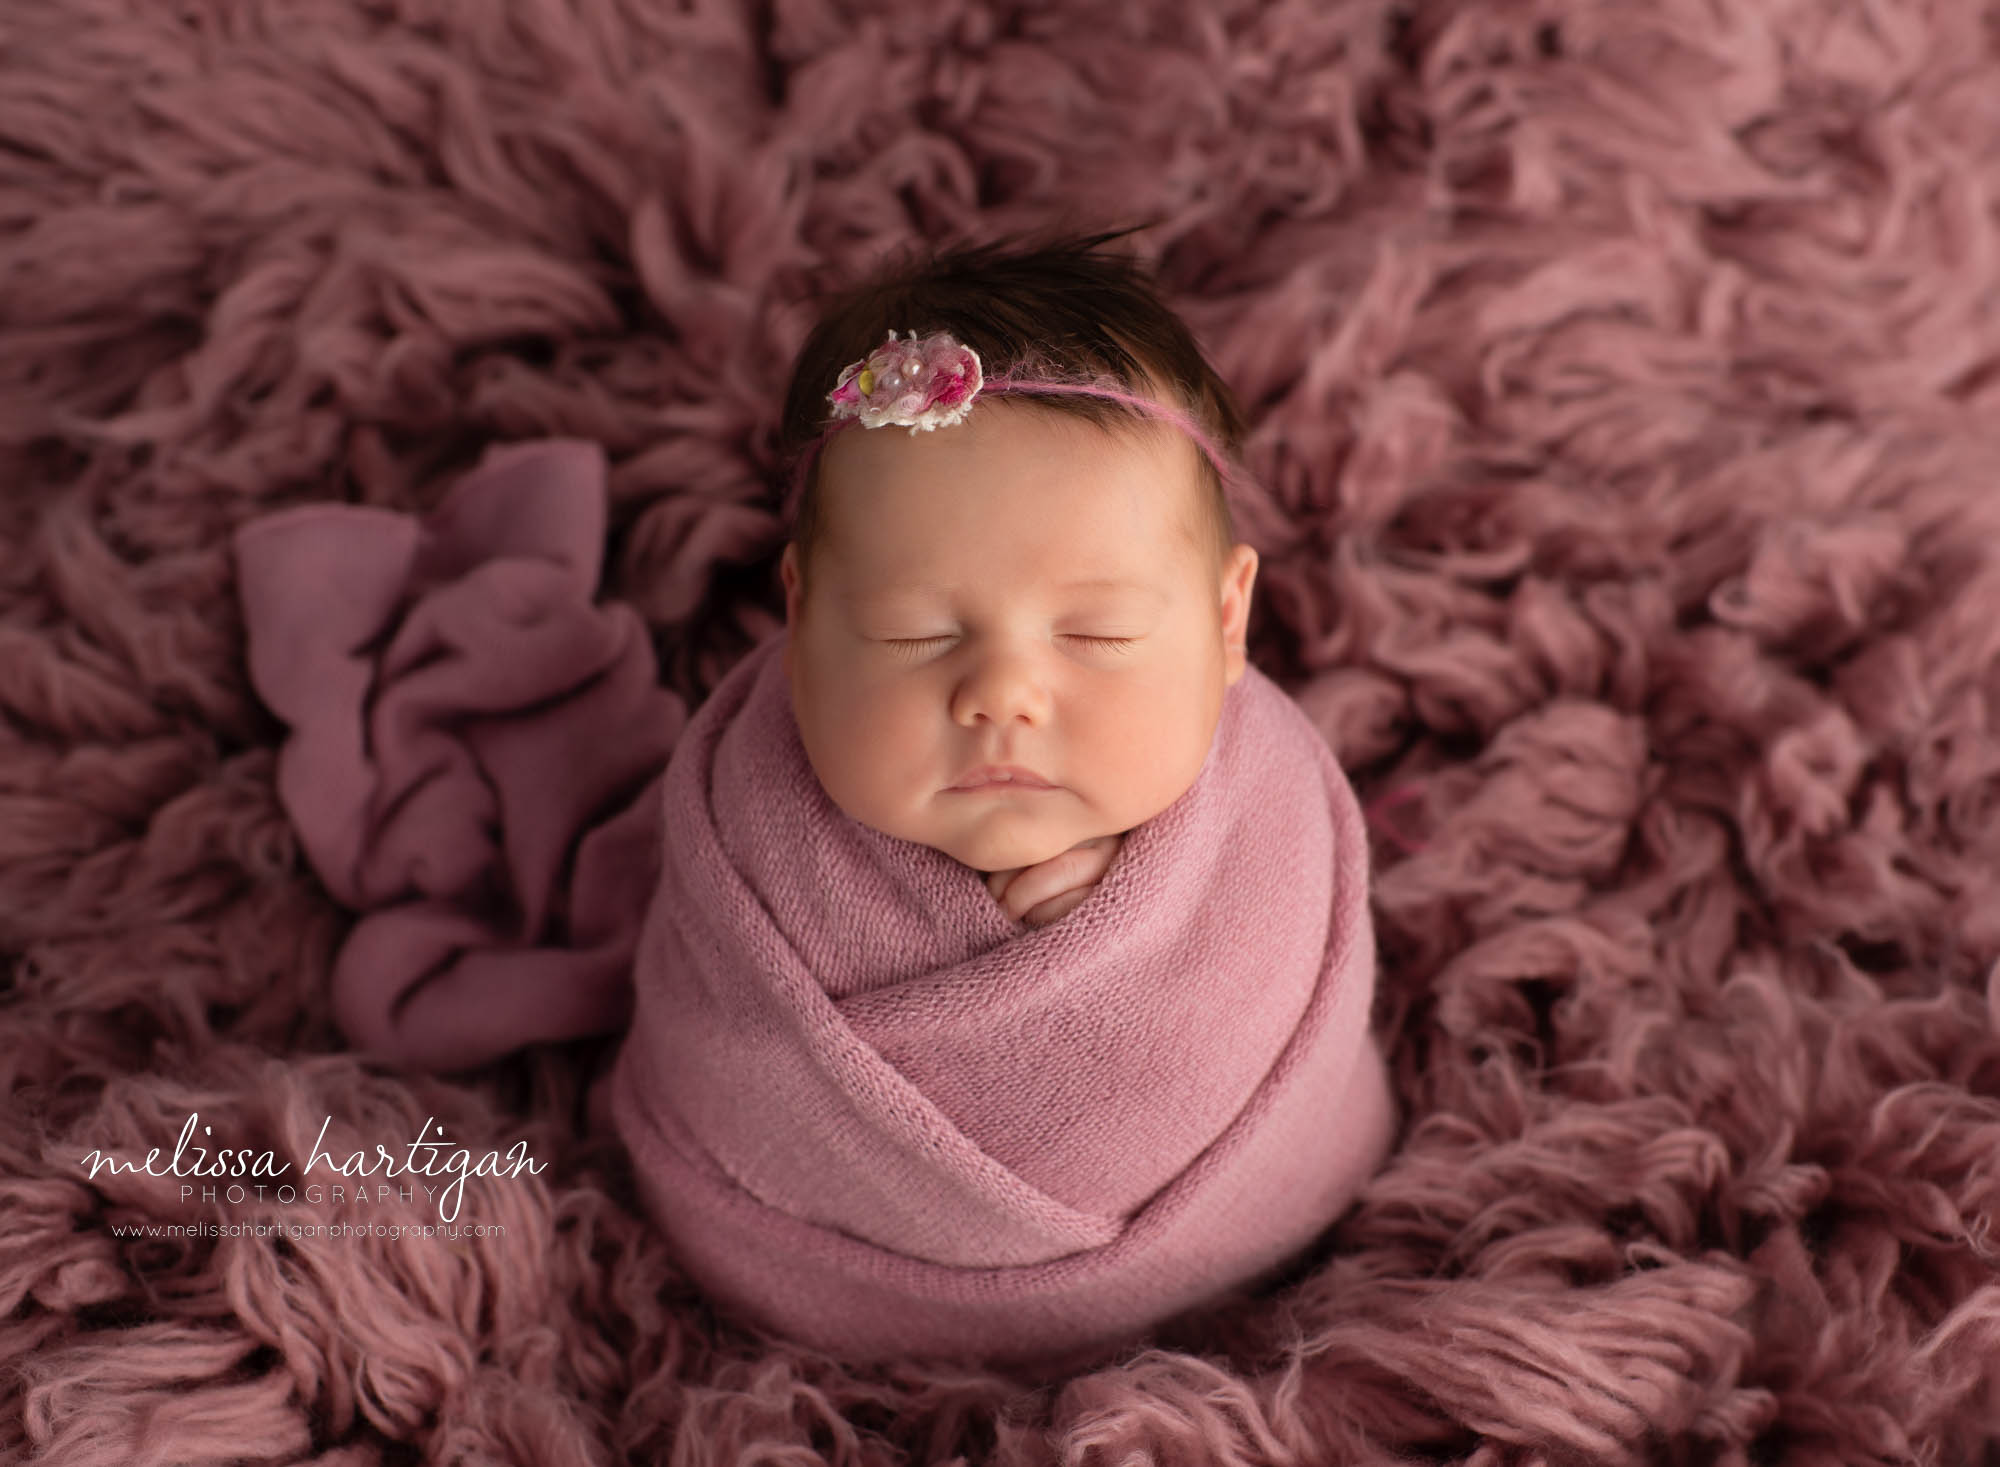 newborn baby girl swaddled in pink knitted wrap wearing headband tieback posed on dusty rose pink colored flokati